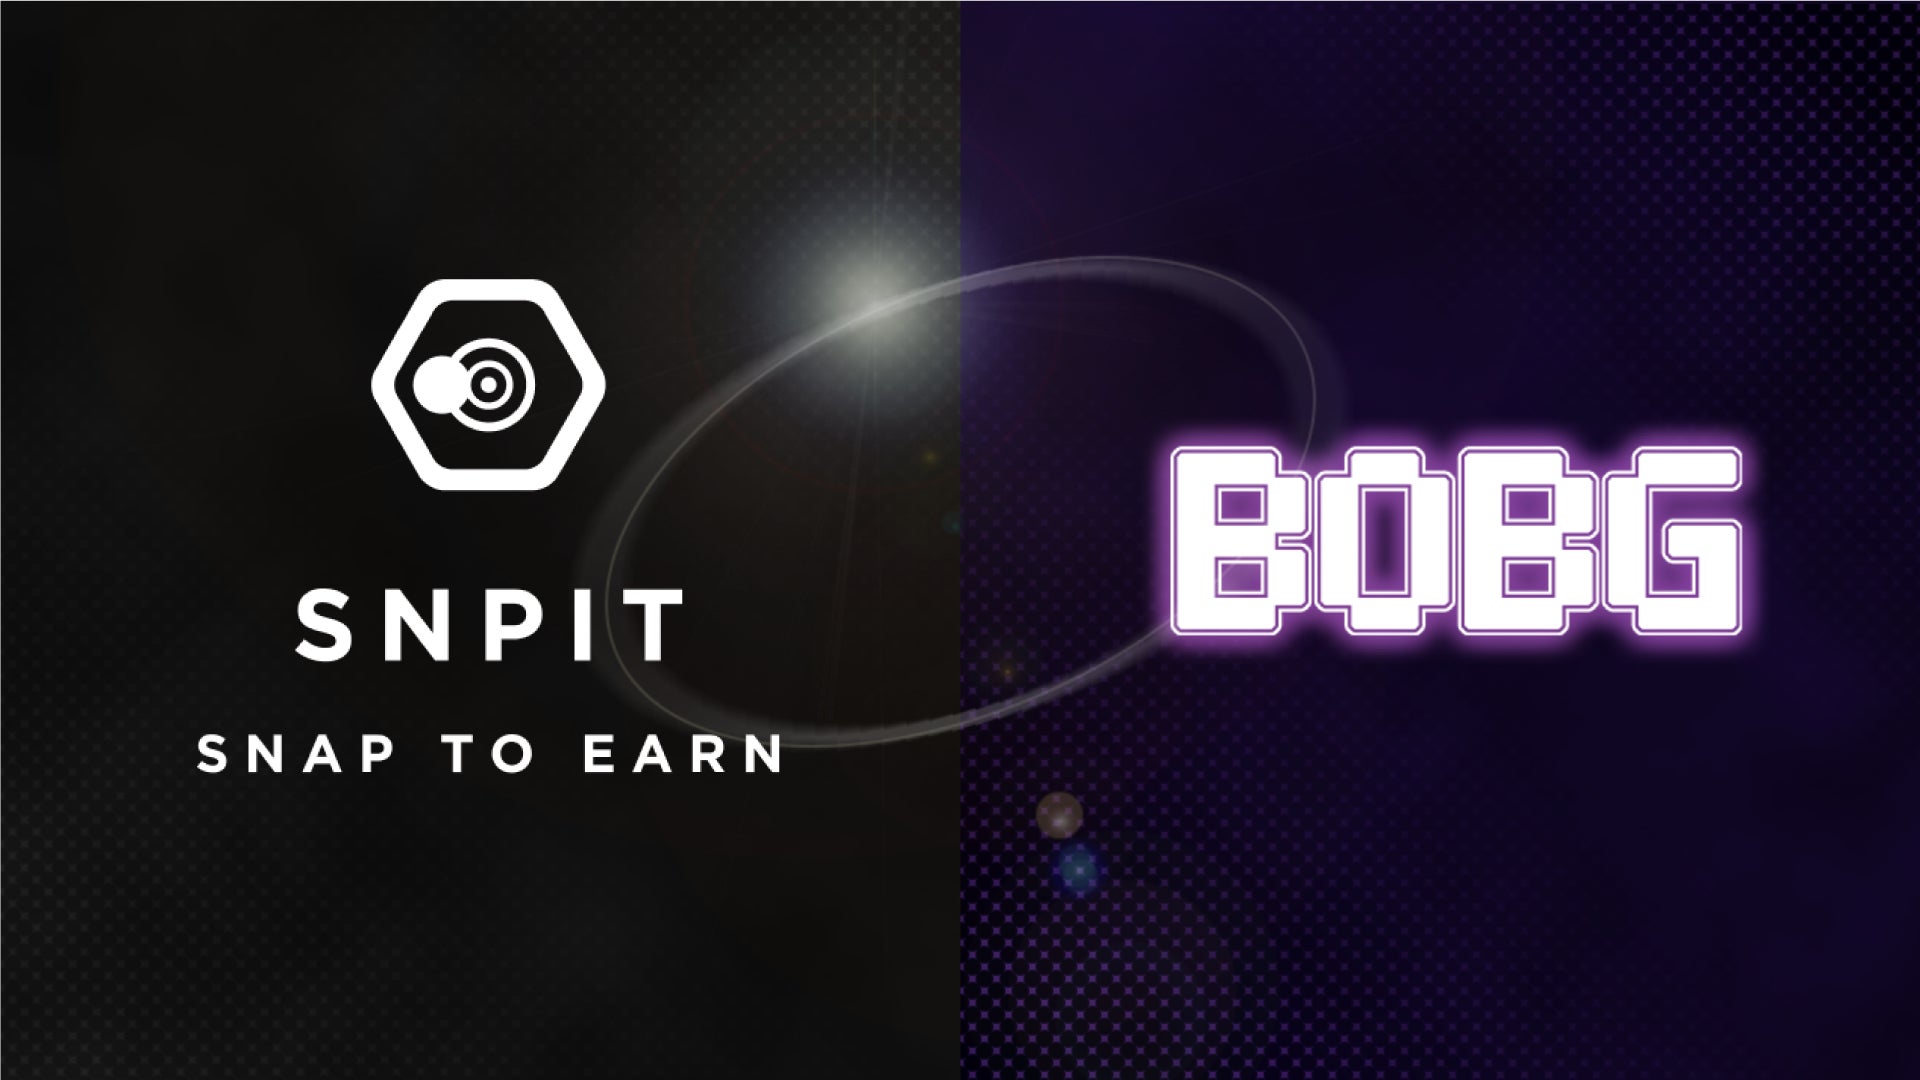 Snap to Earn『SNPIT』のトークン「SNPIT Token」をBOBG社にて発行決定